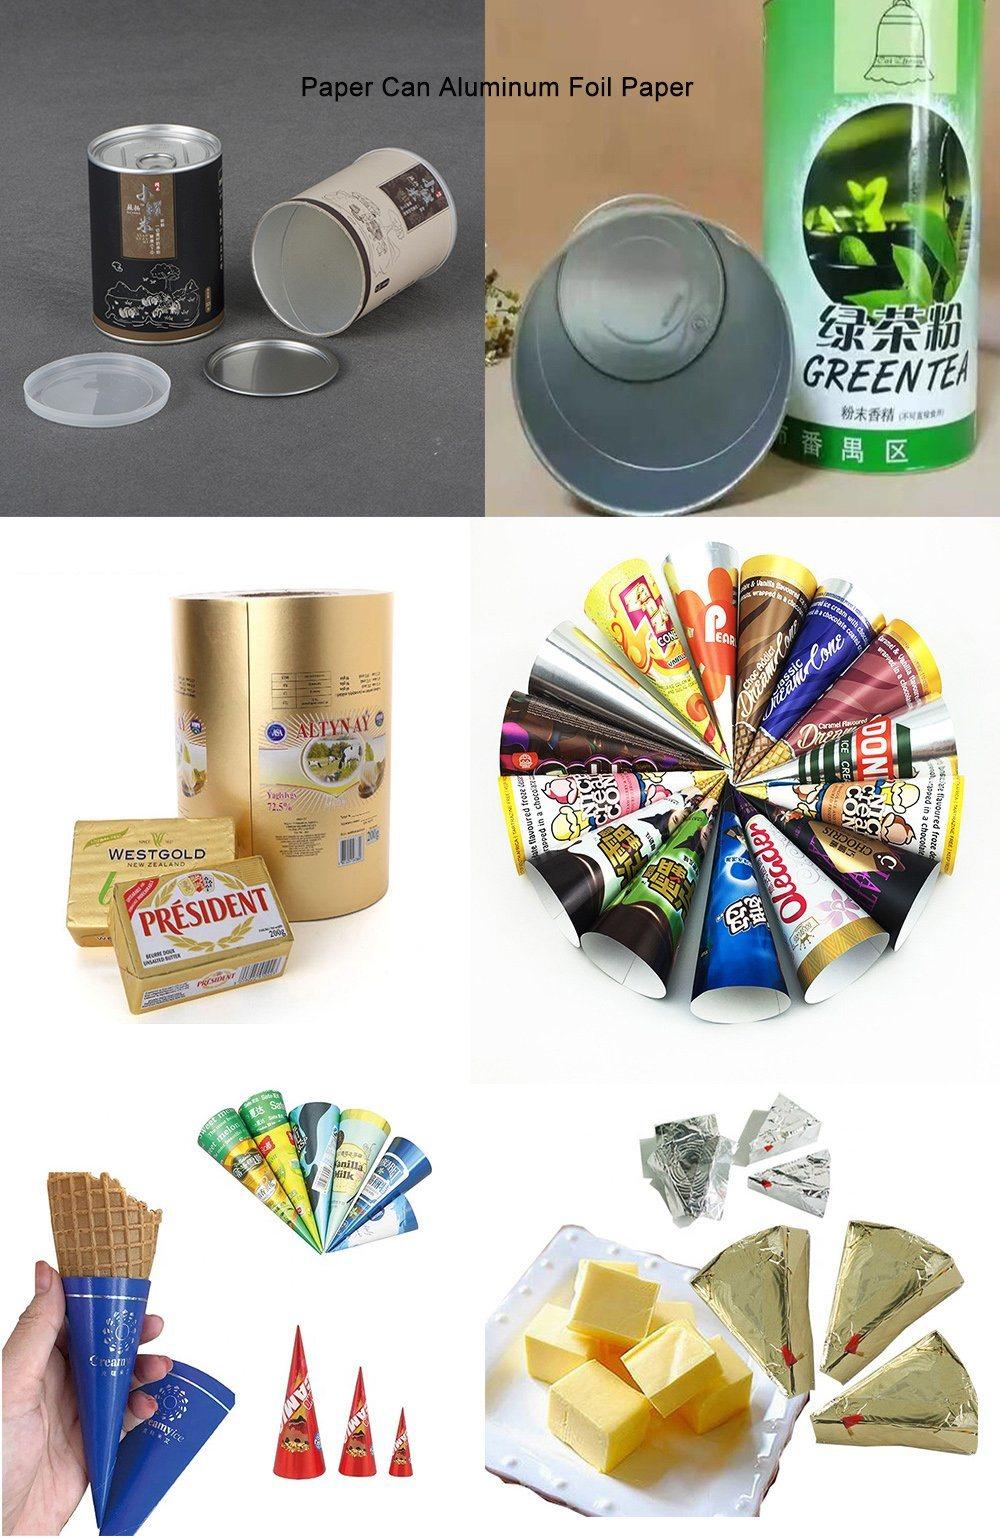 Custom Butter Cone Sleeves Ice Cream Wrapping Food Packaging Aluminium Foil Paper